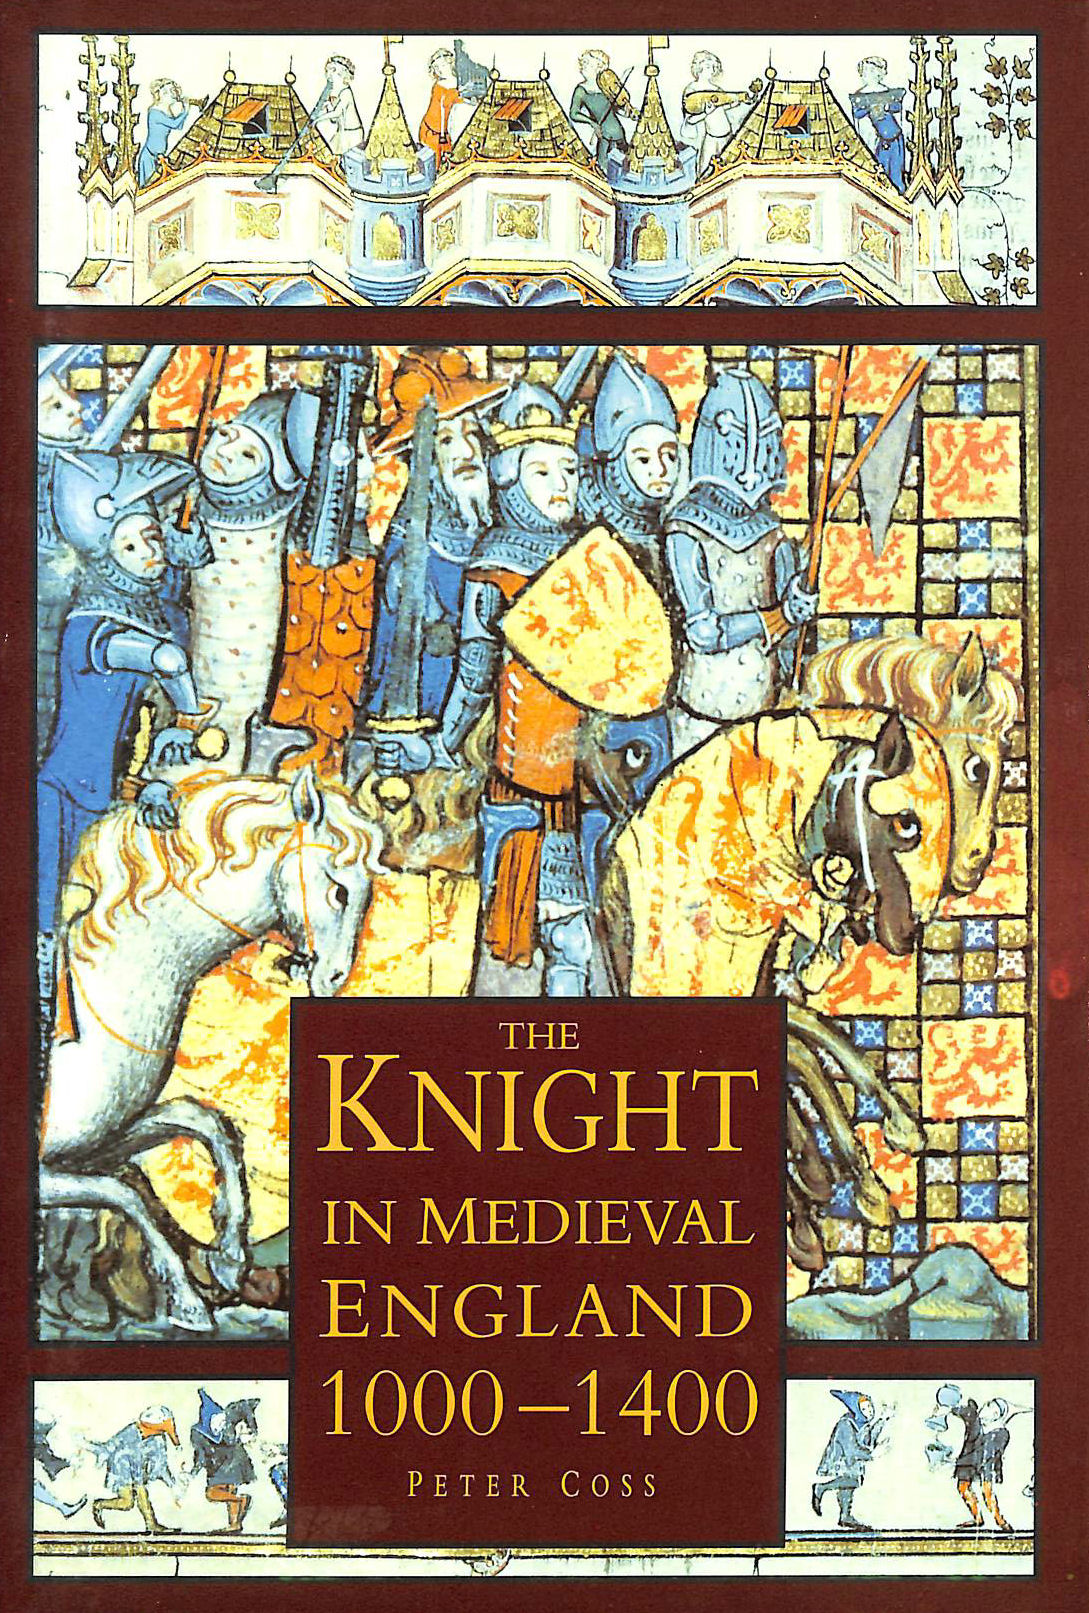 COSS, PETER - The Knight in Medieval England 1000-1400